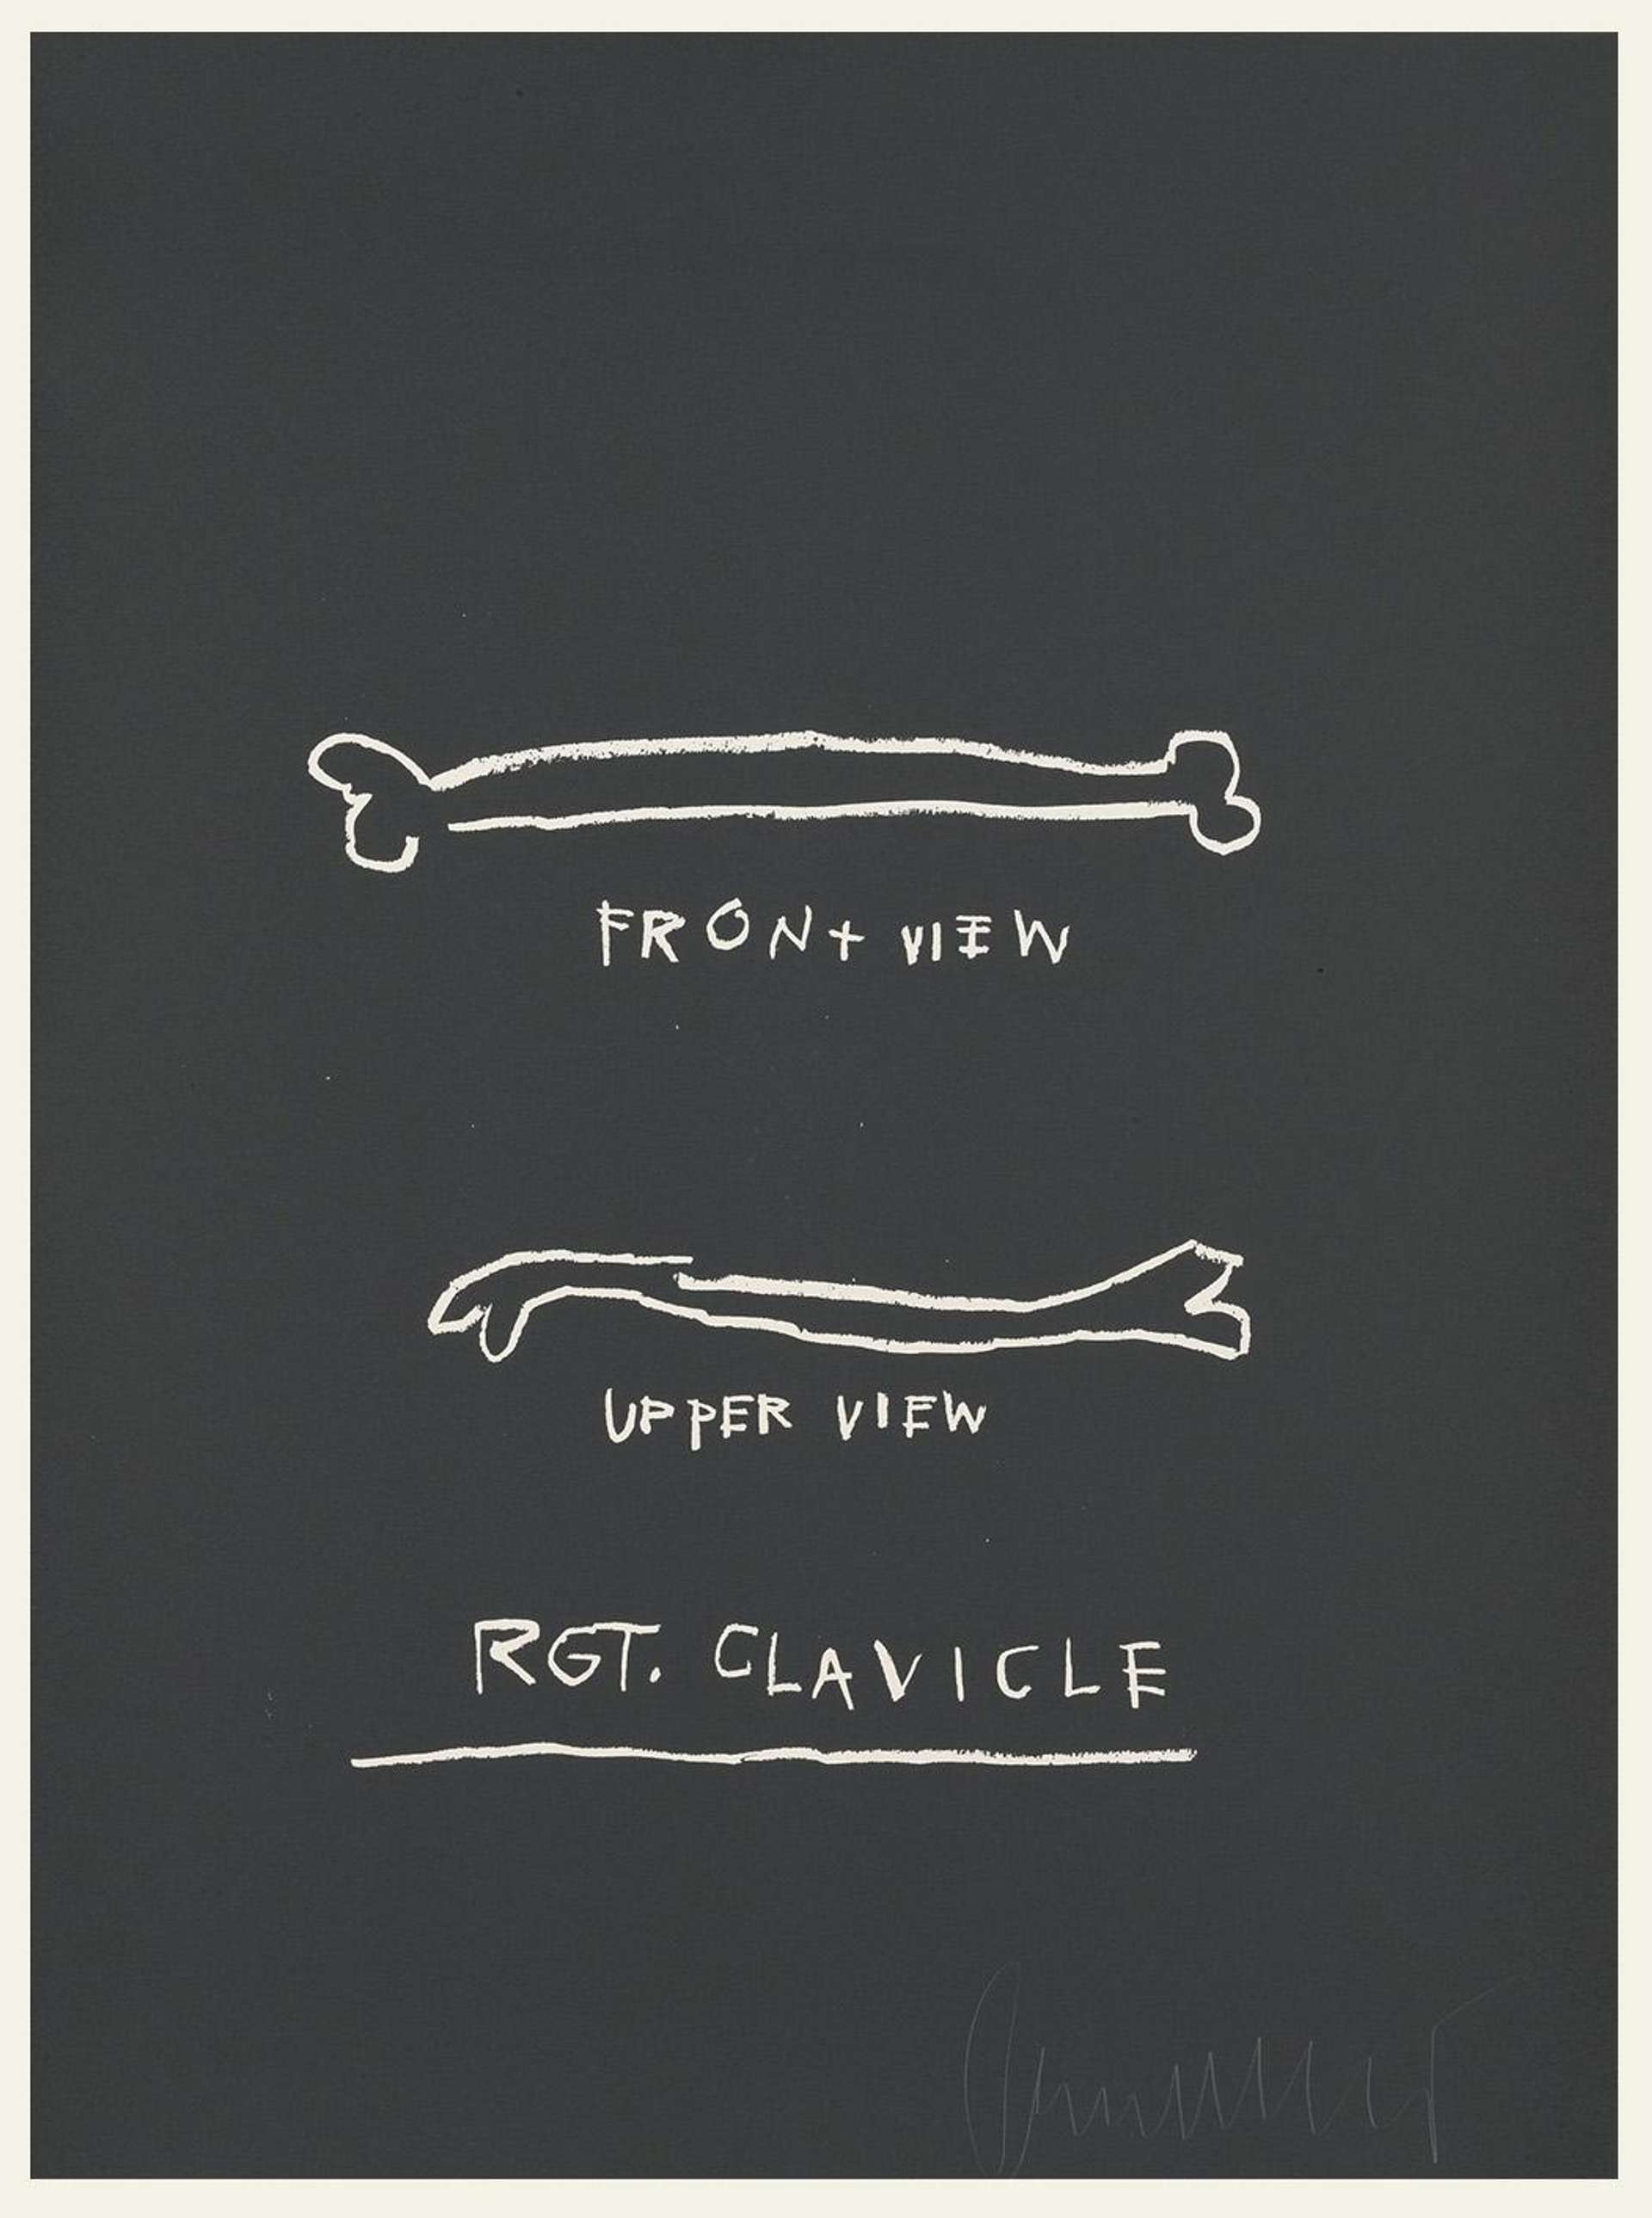 A screenprint by Jean-Michel Basquiat depicting bones and text in white against a black background.